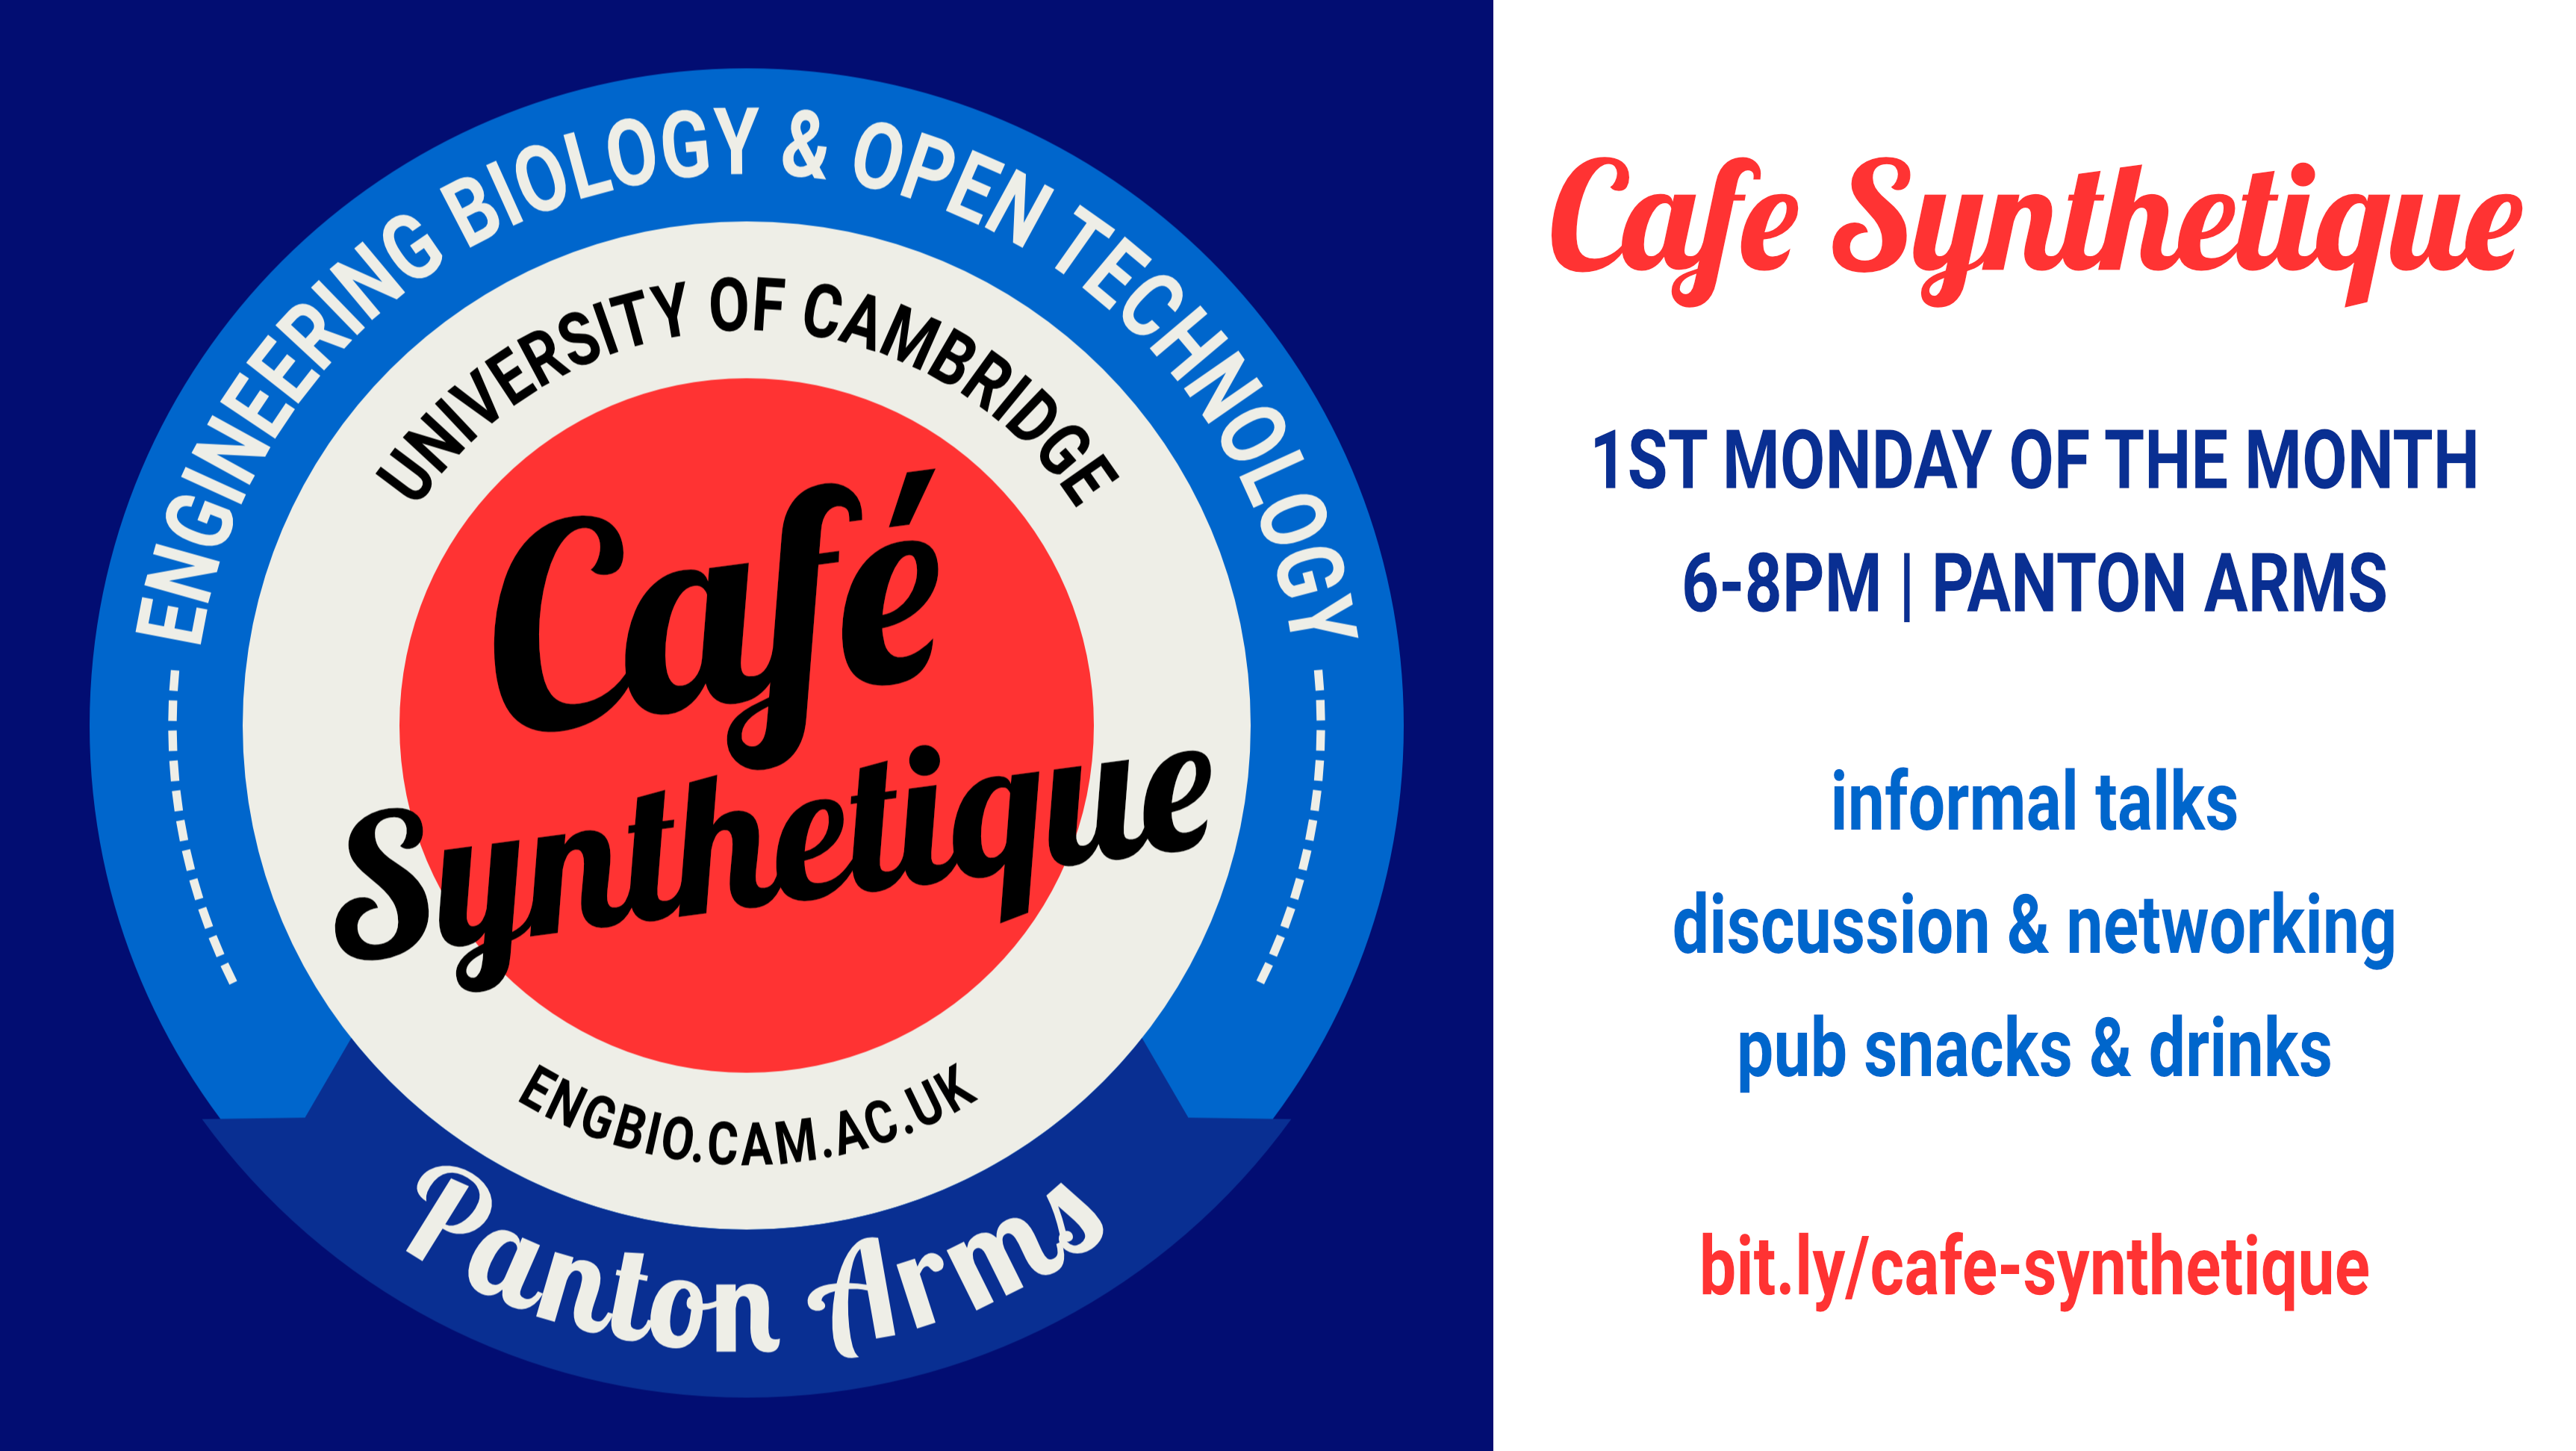 Cafe Synthetique | 1st Monday of the Month 6-8pm | Panton Arms | informal talks, discussion & networking, pub snacks & drinks | bit.ly/cafe-synthetique